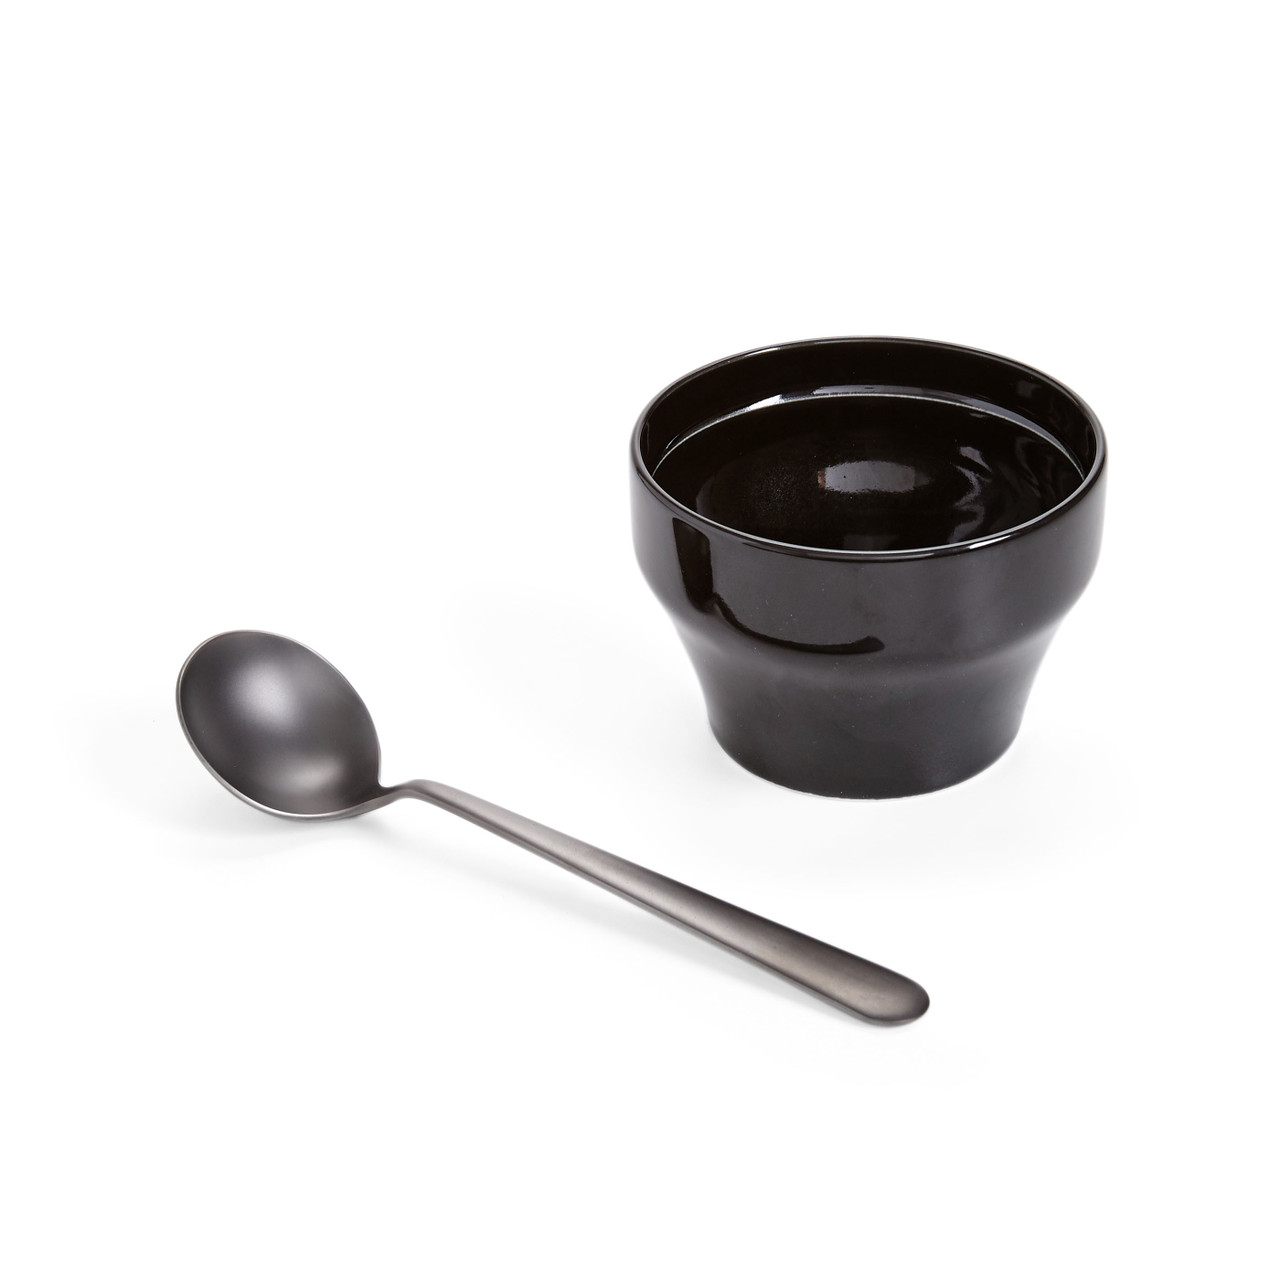 https://cdn11.bigcommerce.com/s-6h7ychjk4/images/stencil/1280x1280/products/8175/89287/hario-kasuya-cupping-bowl-and-spoon-WBG-0300__31649.1597181744.jpg?c=1&imbypass=on